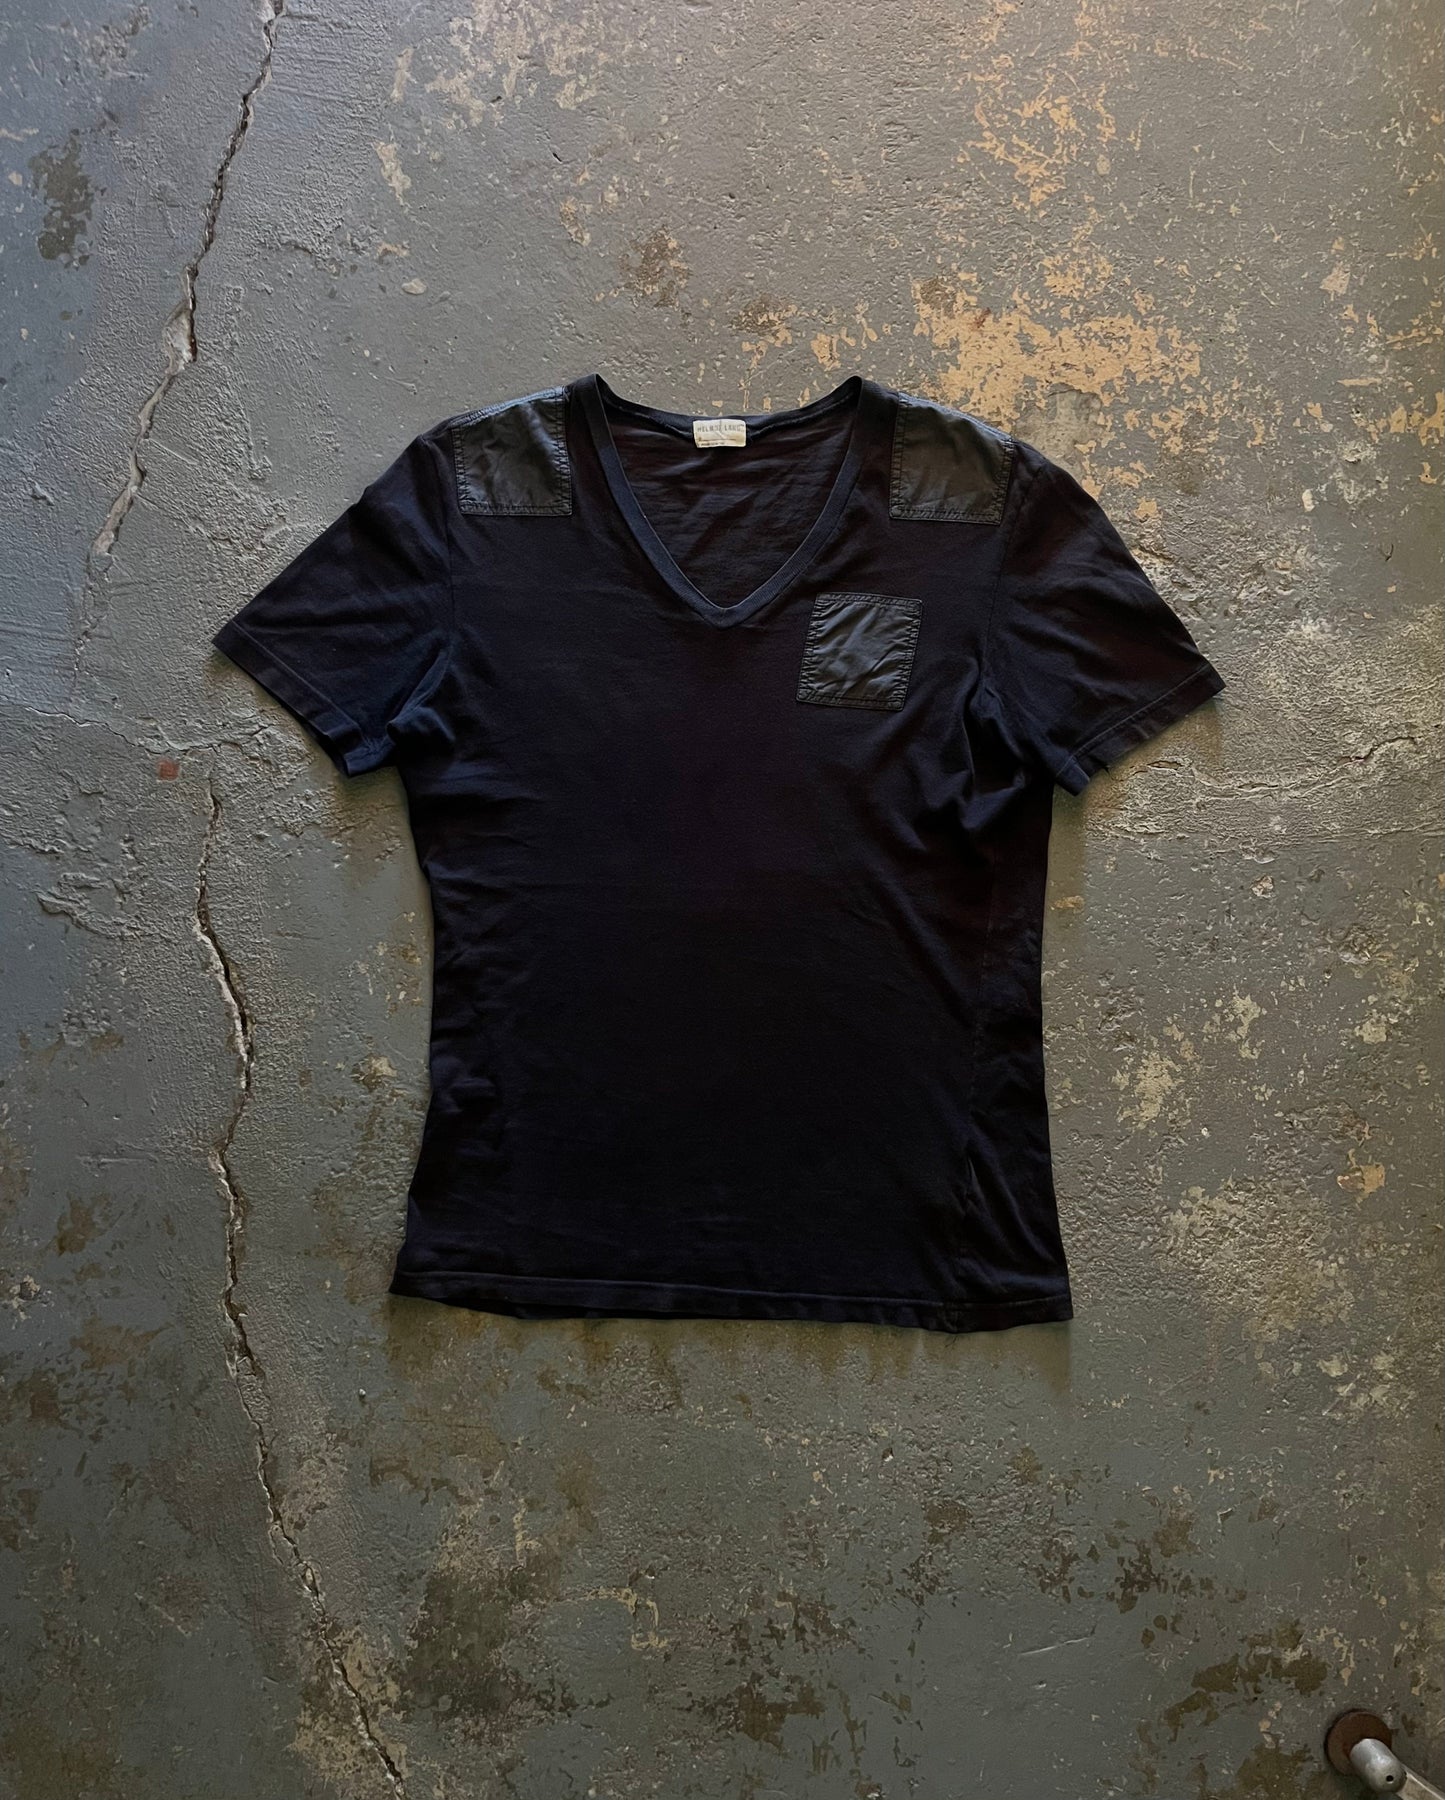 Helmut Lang AW96 Military Patch Tee